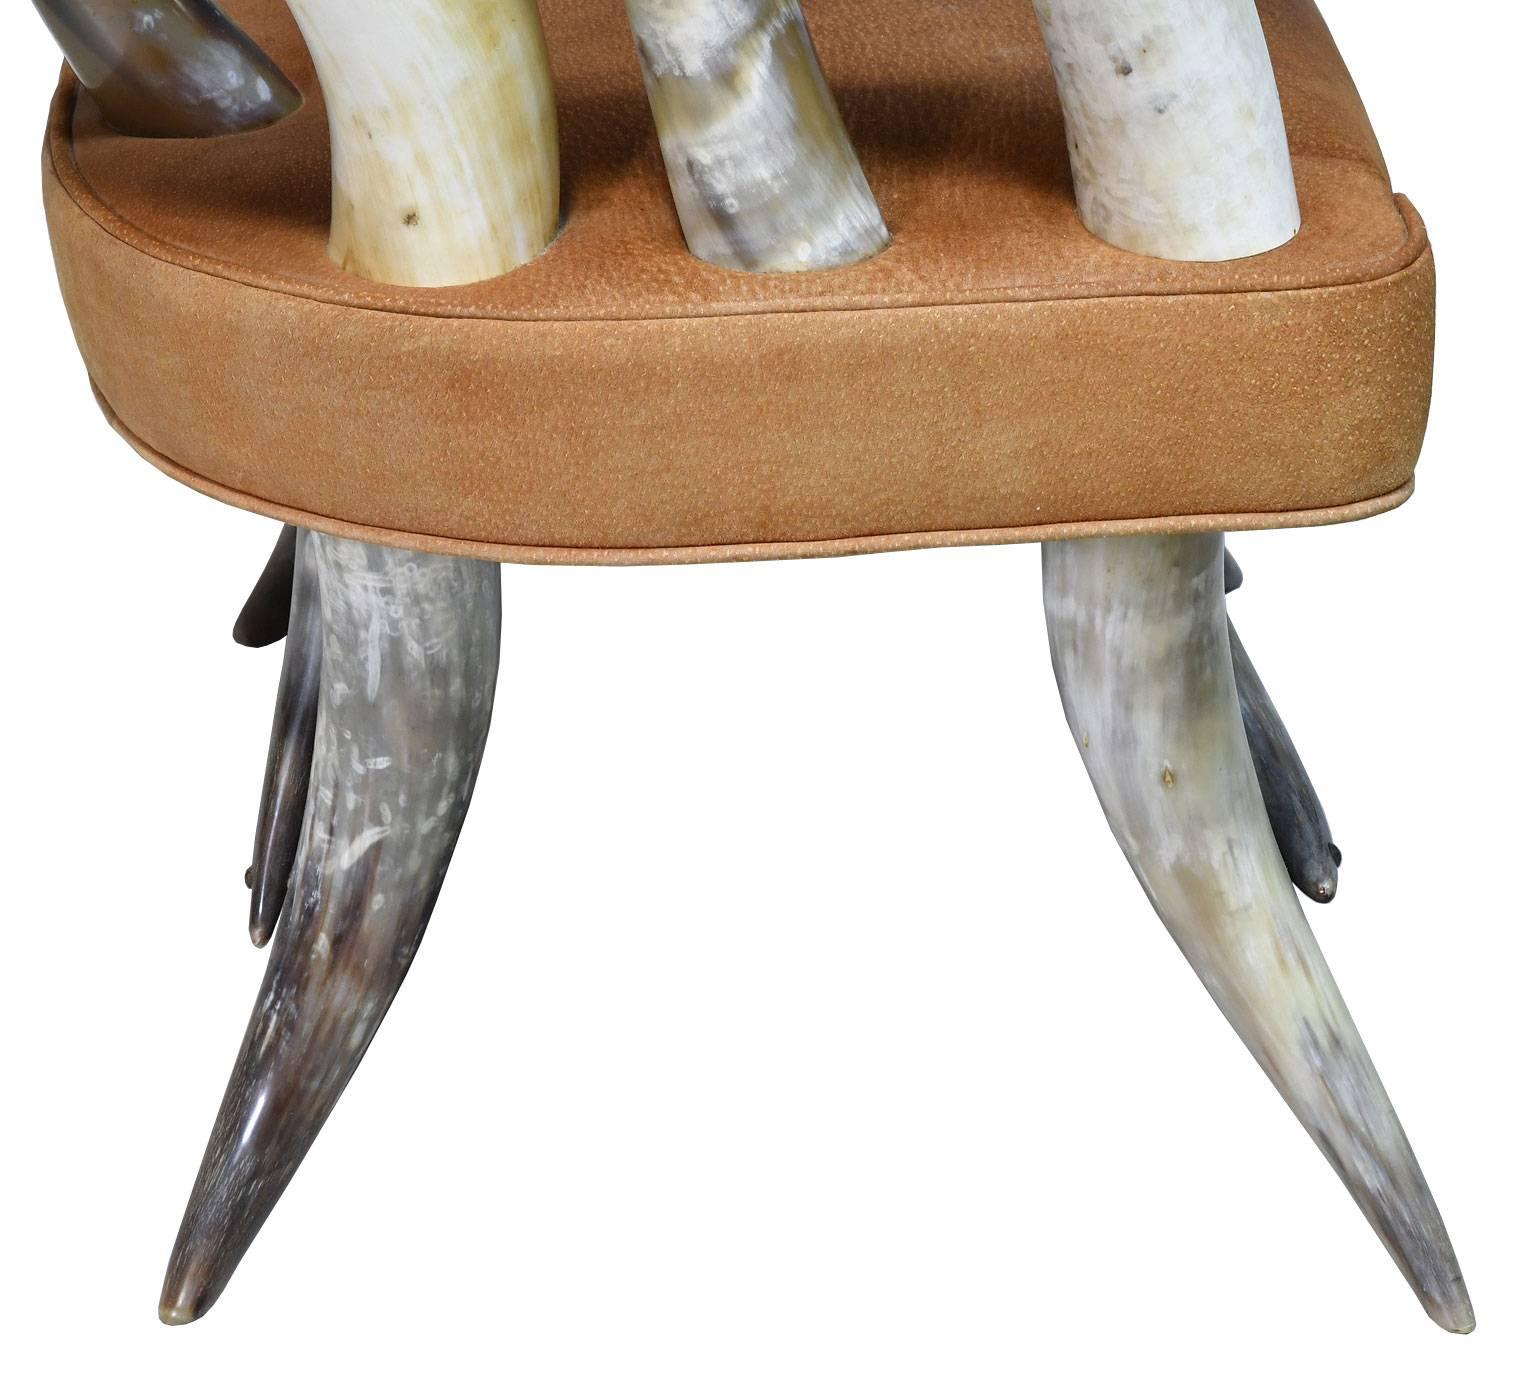 Vintage Rustic American Long-Horn Steer Chair with Leather Seat, circa 1960s For Sale 2